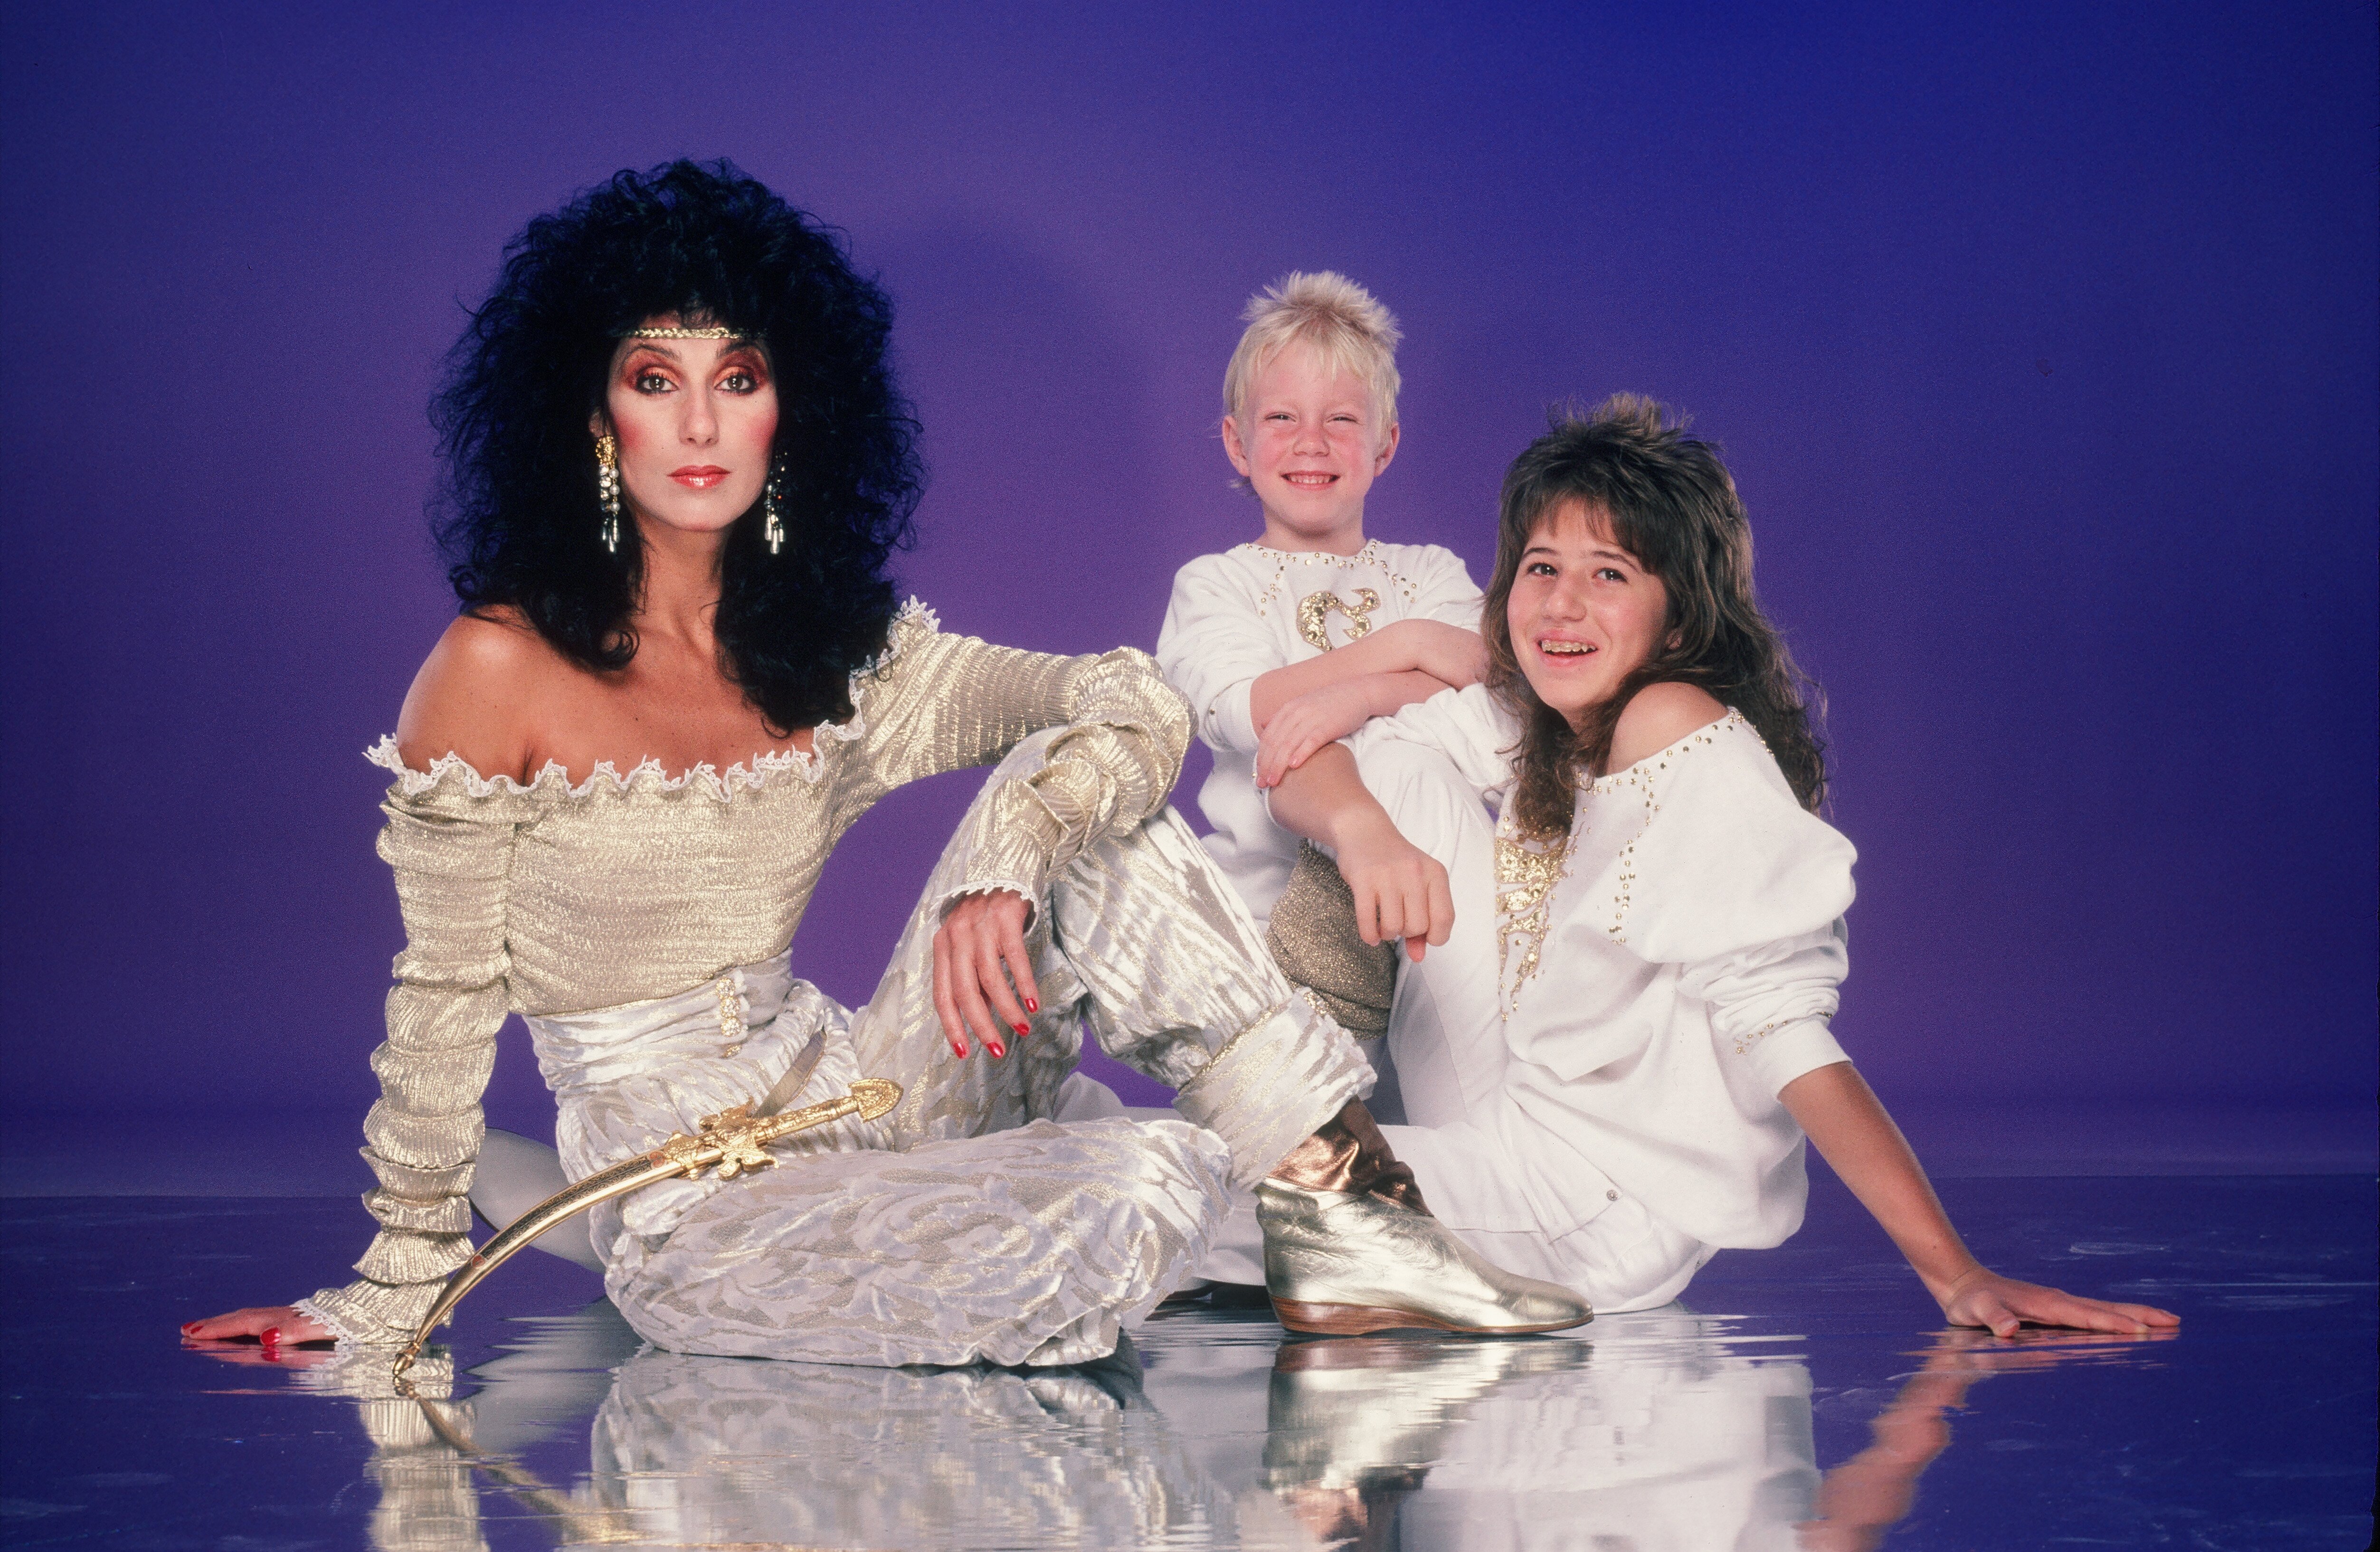 Cher, her daughter Chastity Bono (Chaz Bono) and son Elijah Blue Allman pose for a photo session in June 1981  | Photo: GettyImages